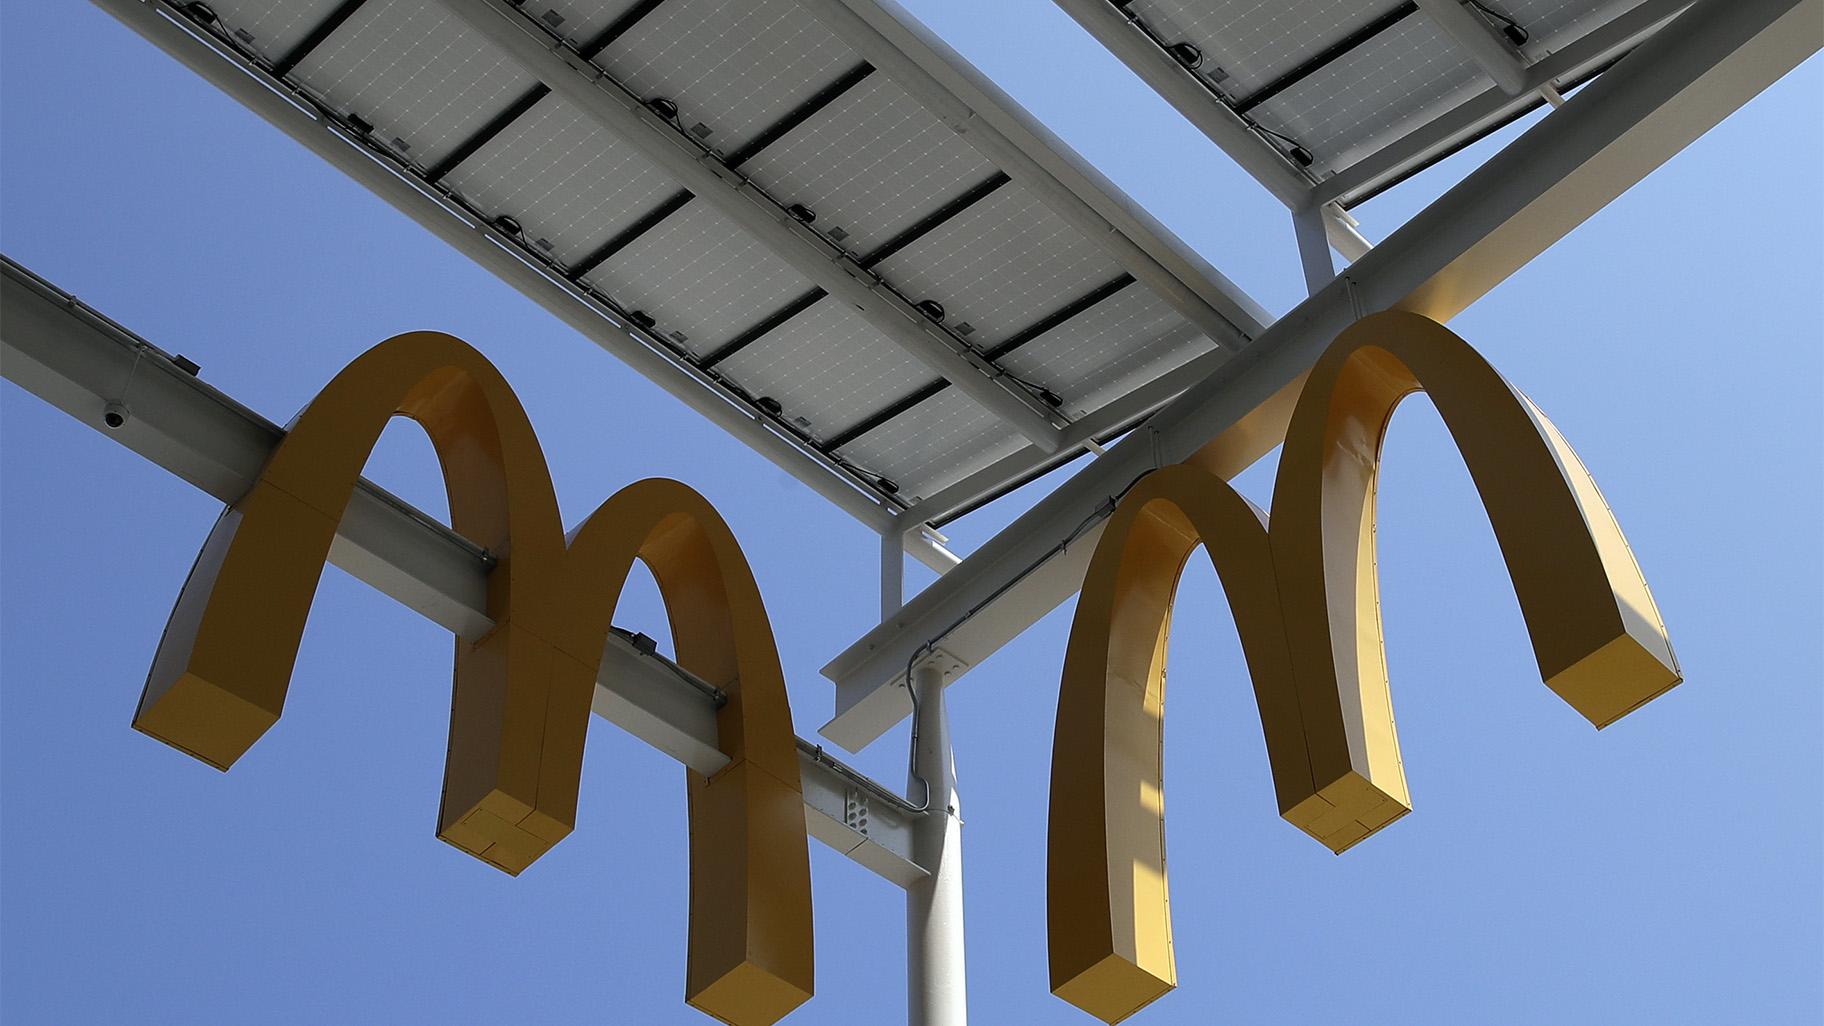 FILE- This Aug. 8, 2018, photo shows logos of McDonald's Chicago flagship restaurant. (AP Photo / Nam Y. Huh, File)